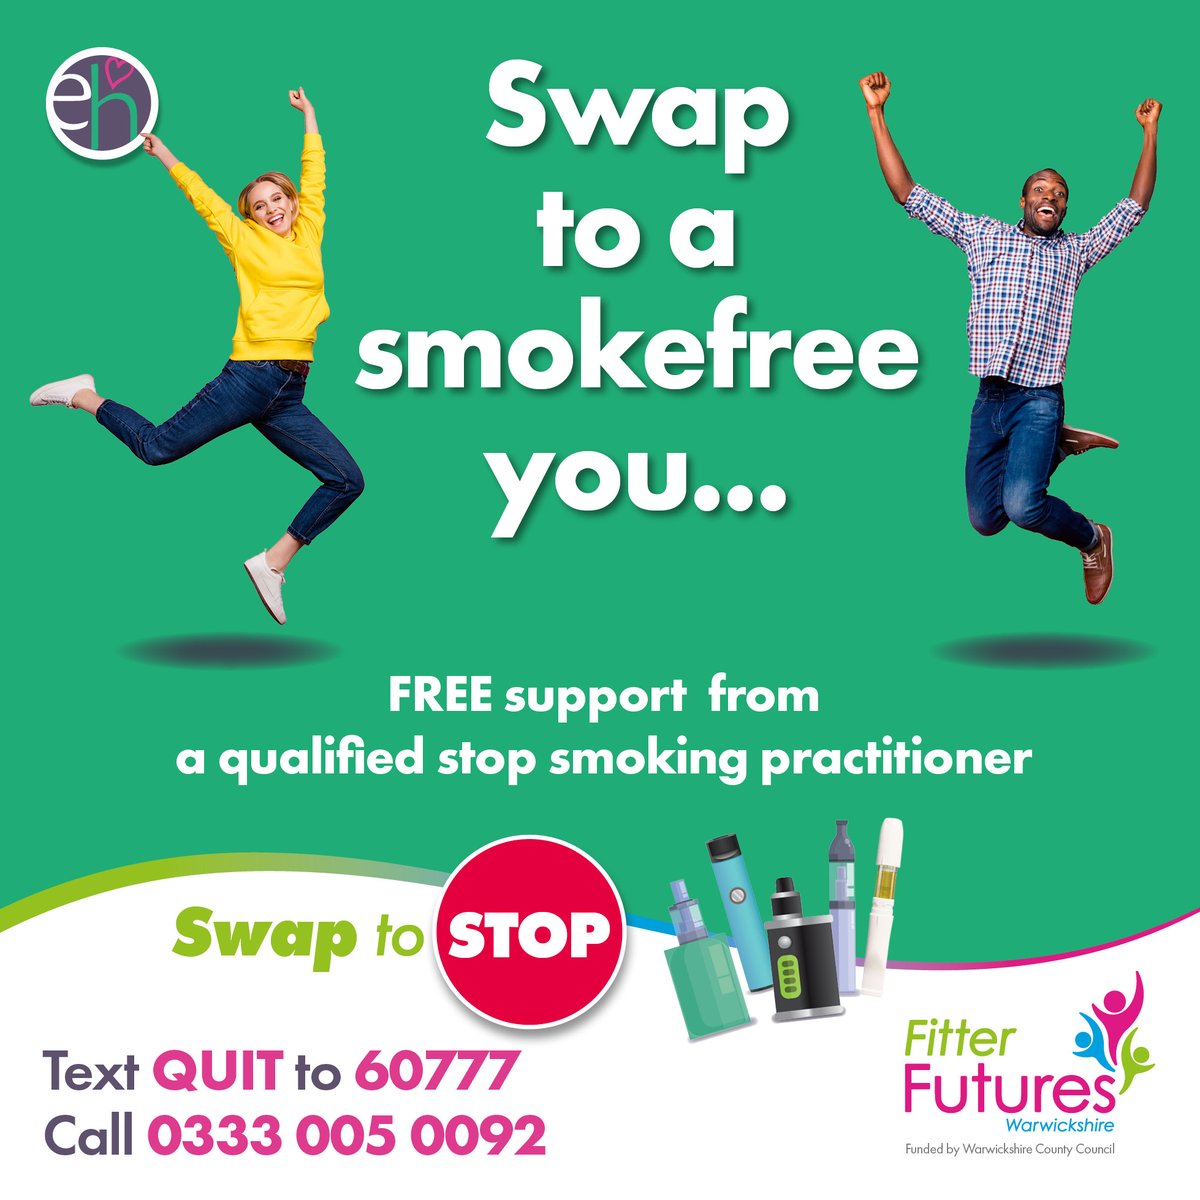 Join the millions of adults across the UK who are going #Smokefree with a Quit Kit. 🚭 1 in 10 ex-smokers have said they’ve successfully quit smoking with the help of an e-cigarette. For free personalised support and advice visit 🔗fitterfutures.everyonehealth.co.uk/stop-smoking-s… or text QUIT to 60777.